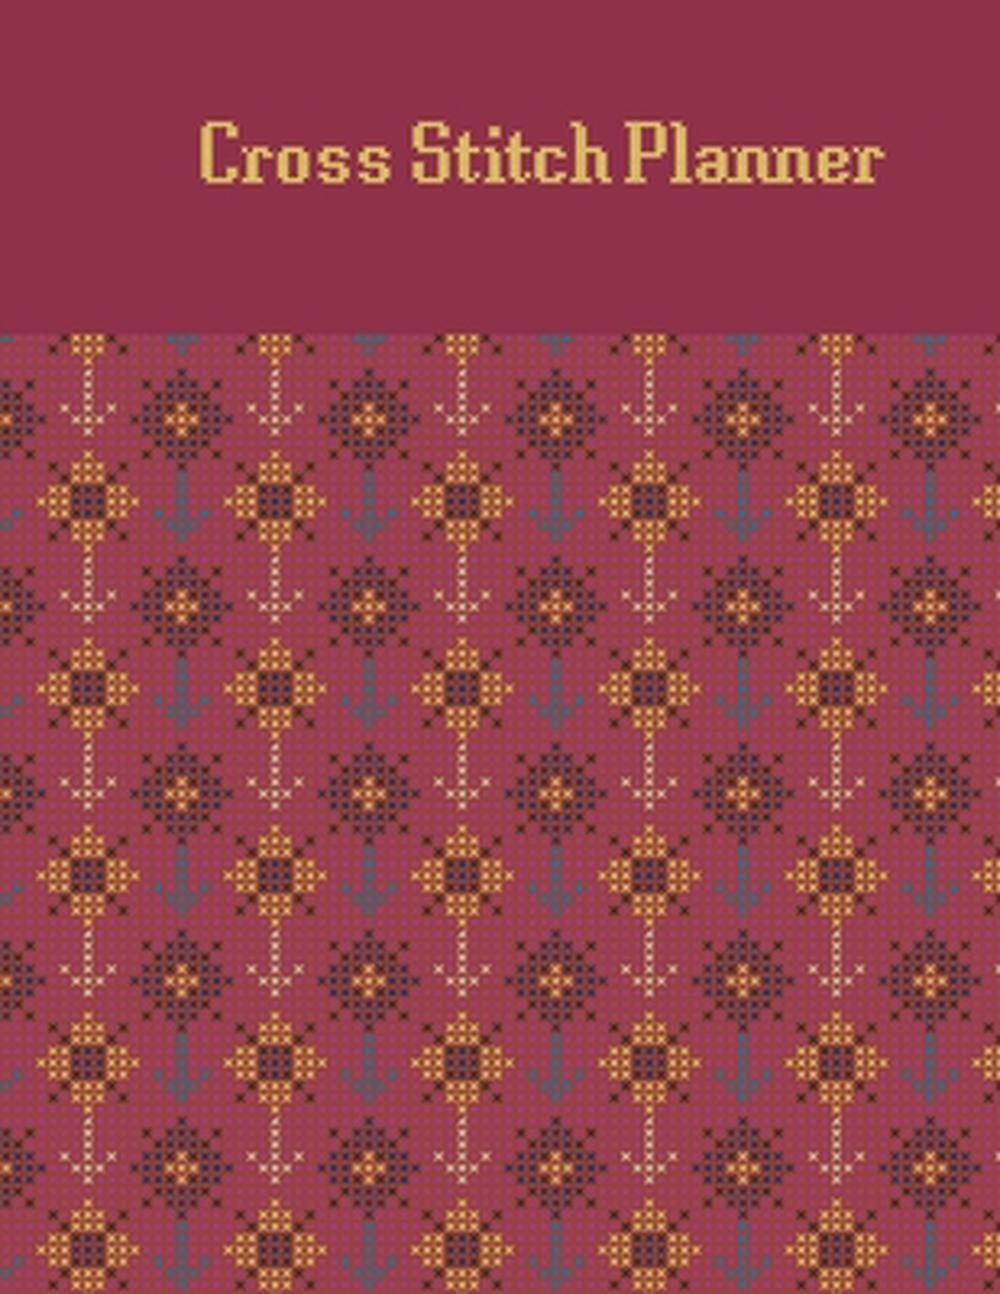 cross stitch graph paper 18 count printable